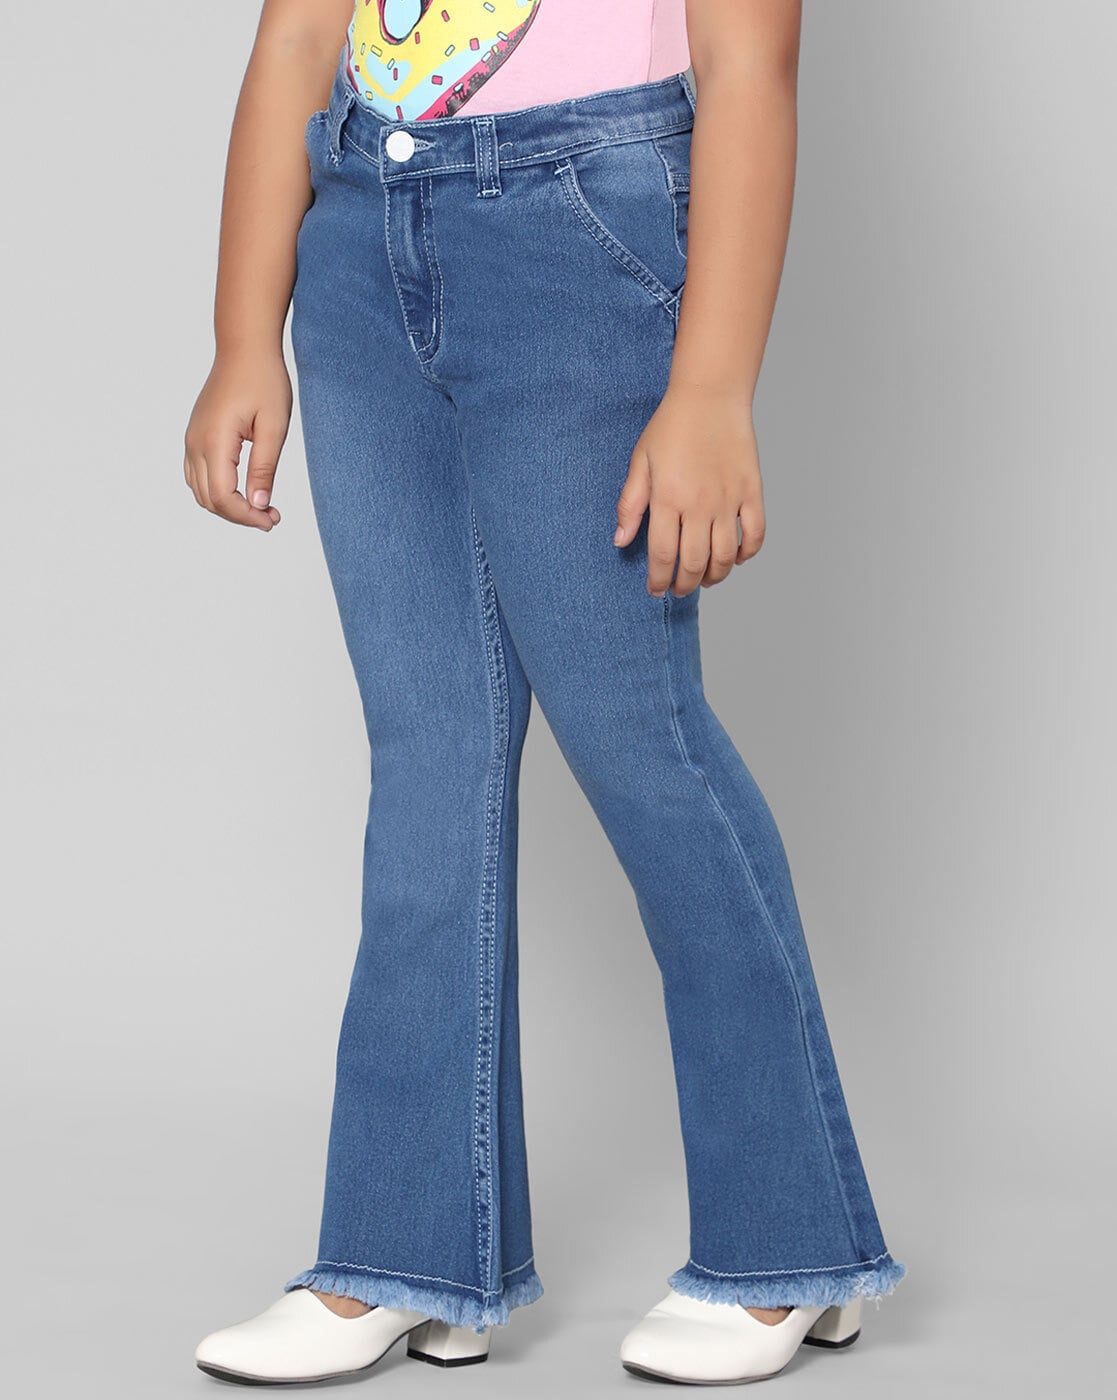 Brunette selfie jean girl Stable Diffusion prompt - Midjourney